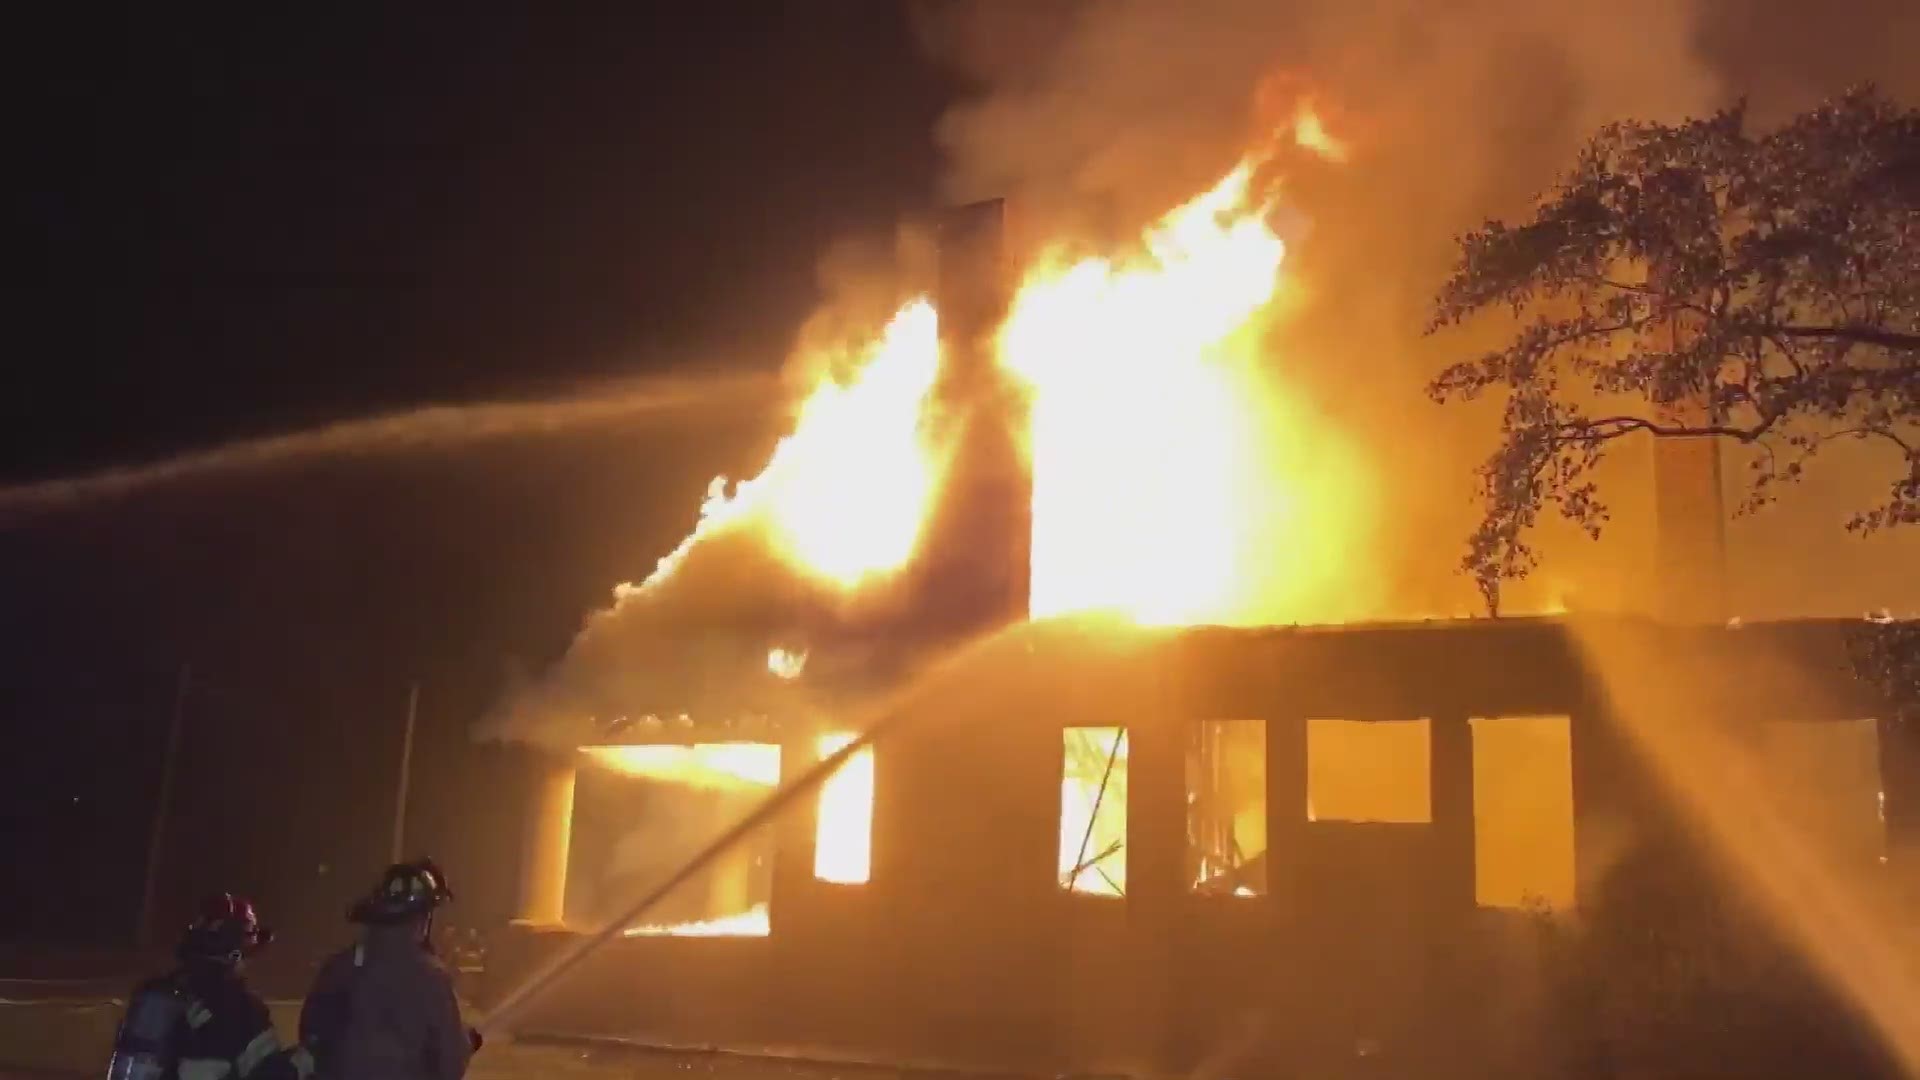 An early morning fire on Friday destroyed an 'icon' of Cochran -- the Rutland Apartments building. Video courtesy of the Bleckley County Fire Department.